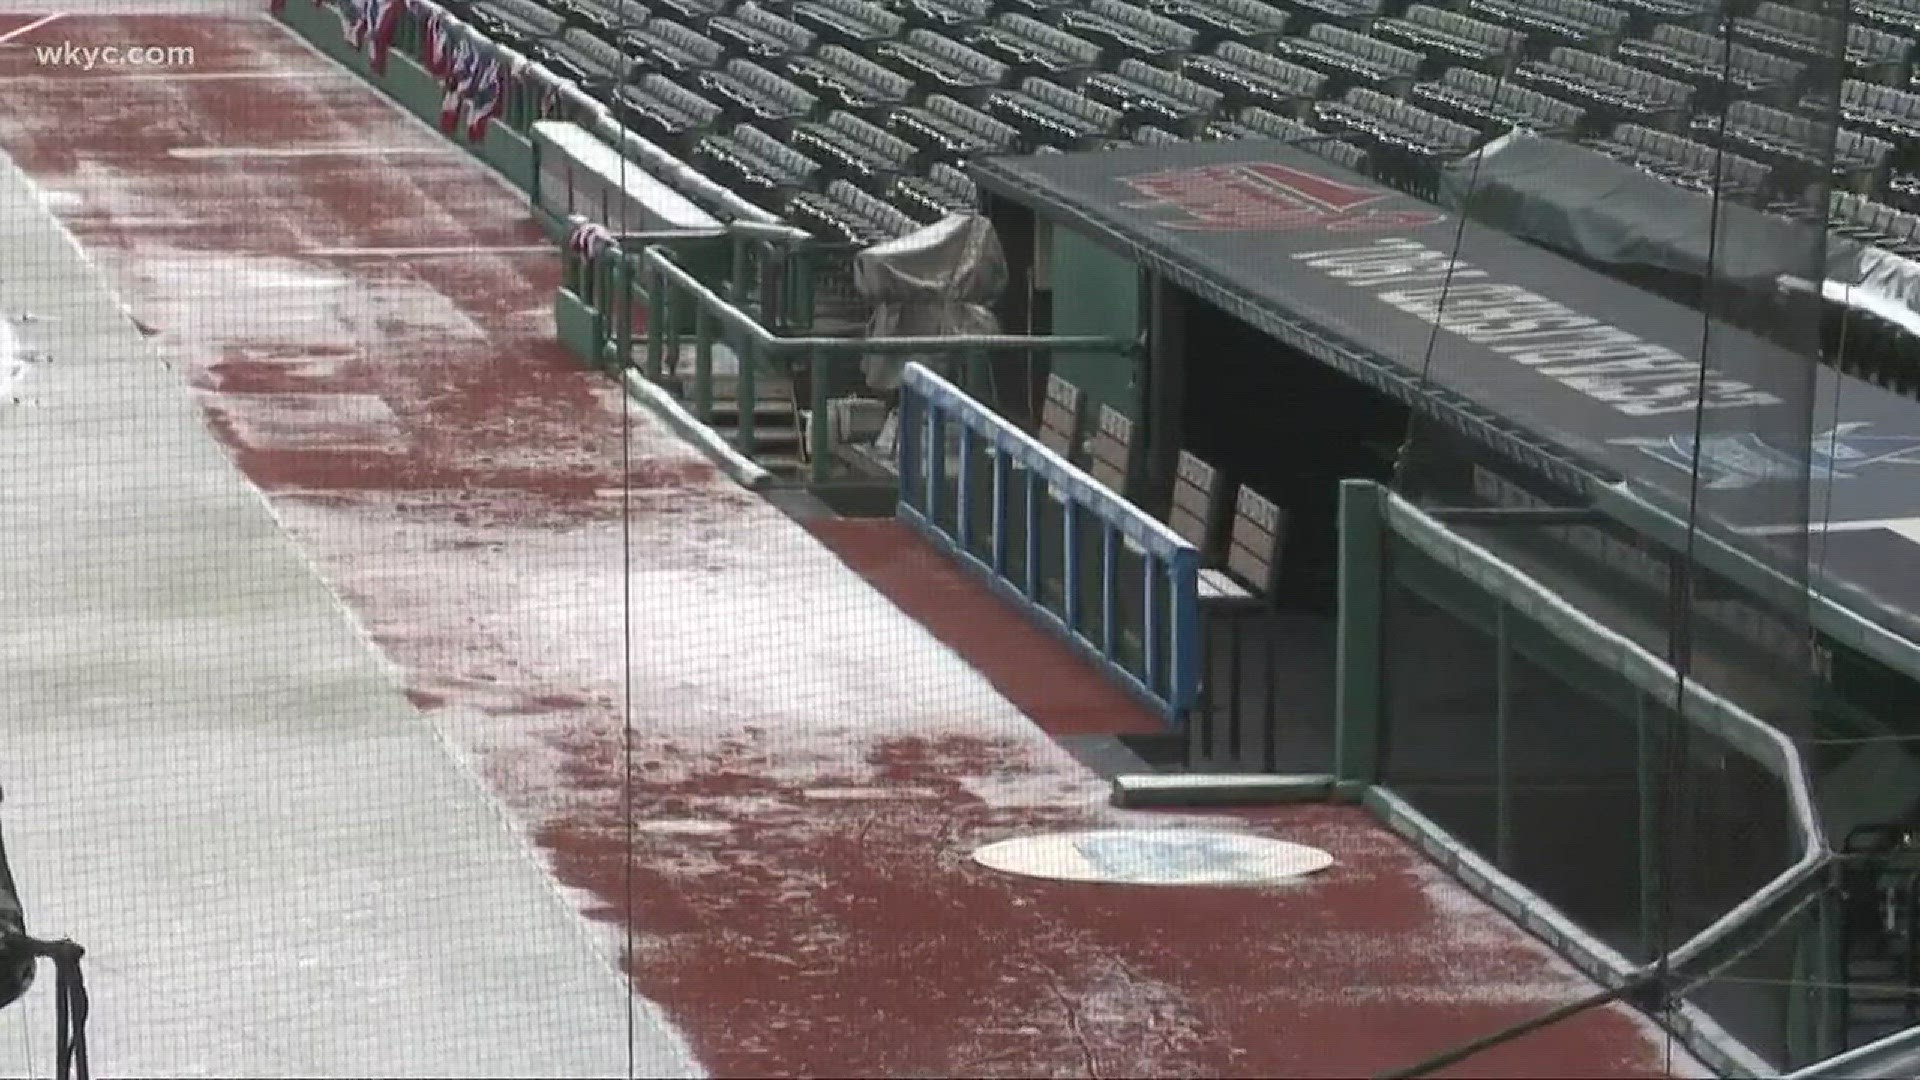 Dec. 6, 2017: The Indians will attempt to improve fan safety by expanding the netting behind home plate to the far ends of each dugout in 2018. The netting will now run down much of the first and third base lines, from section 140 to section 164.